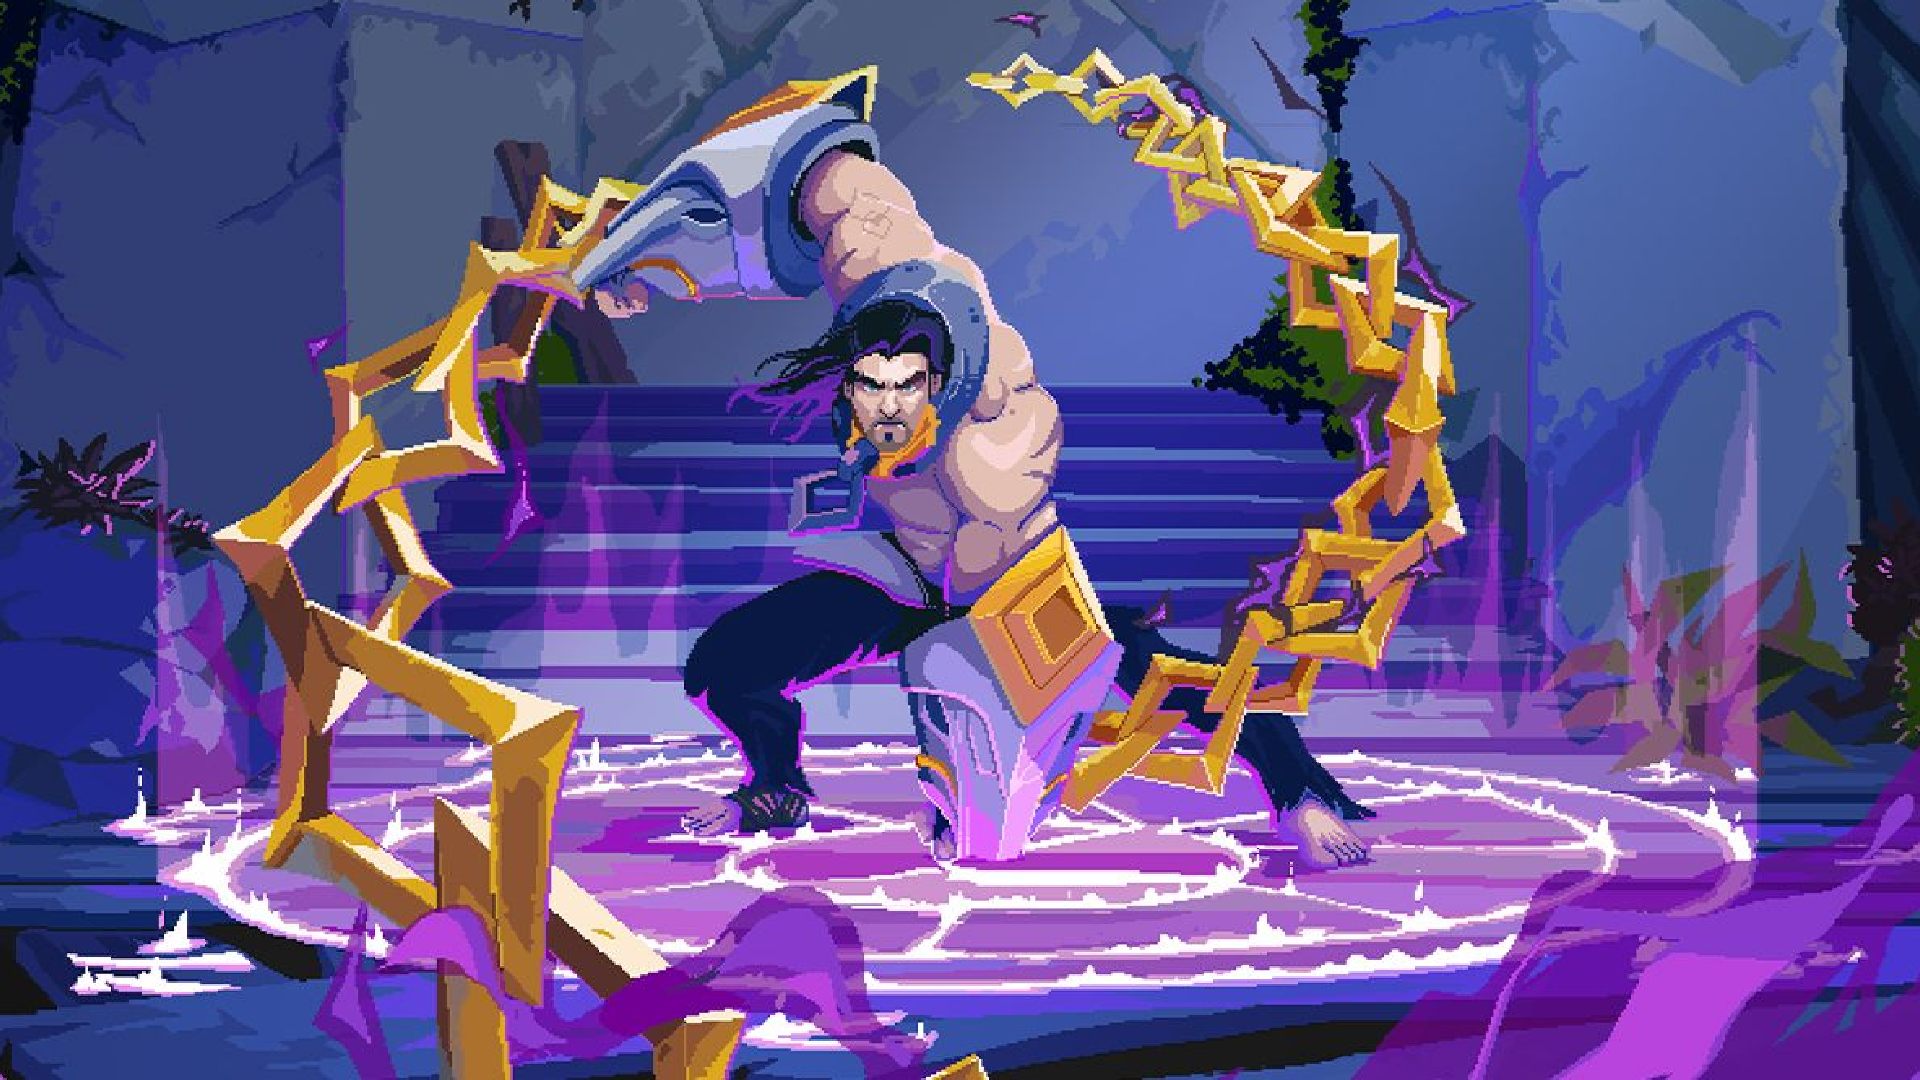 The Mageseeker: Sylas can be seen